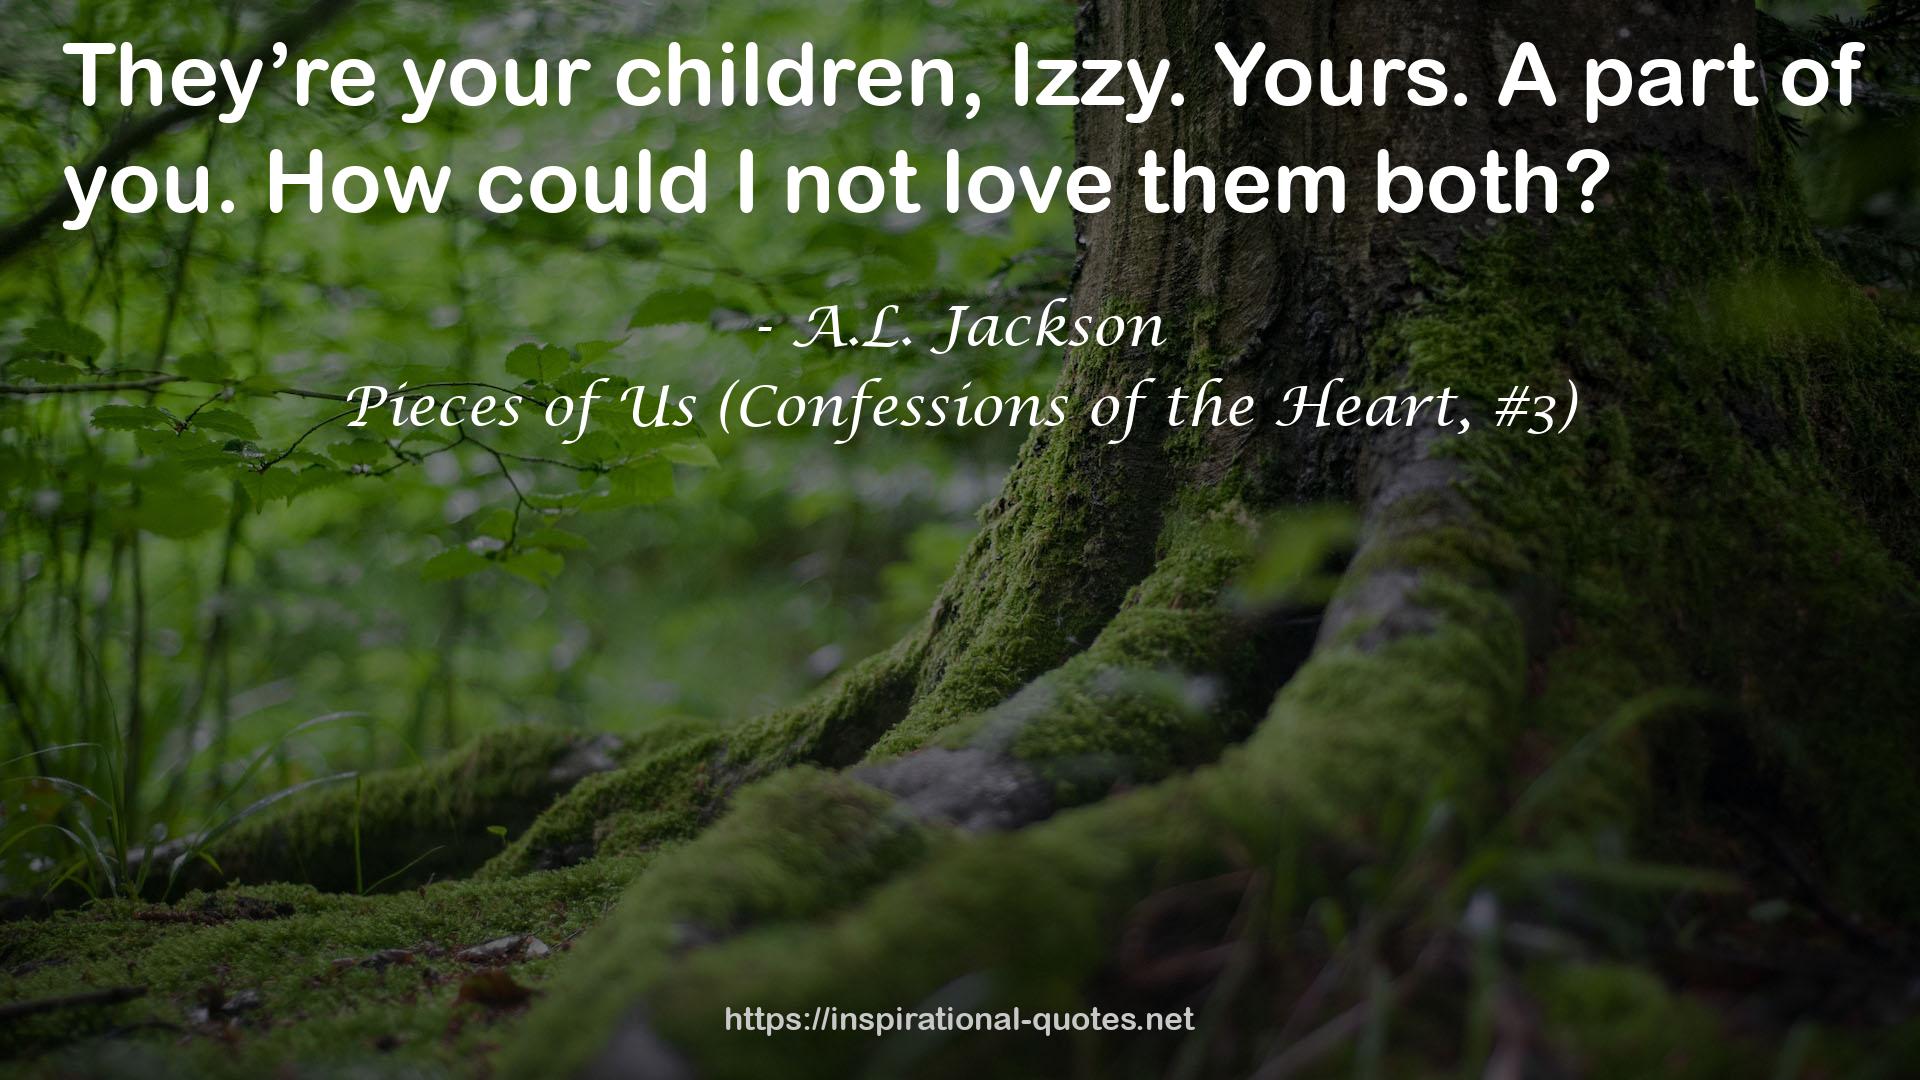 Pieces of Us (Confessions of the Heart, #3) QUOTES